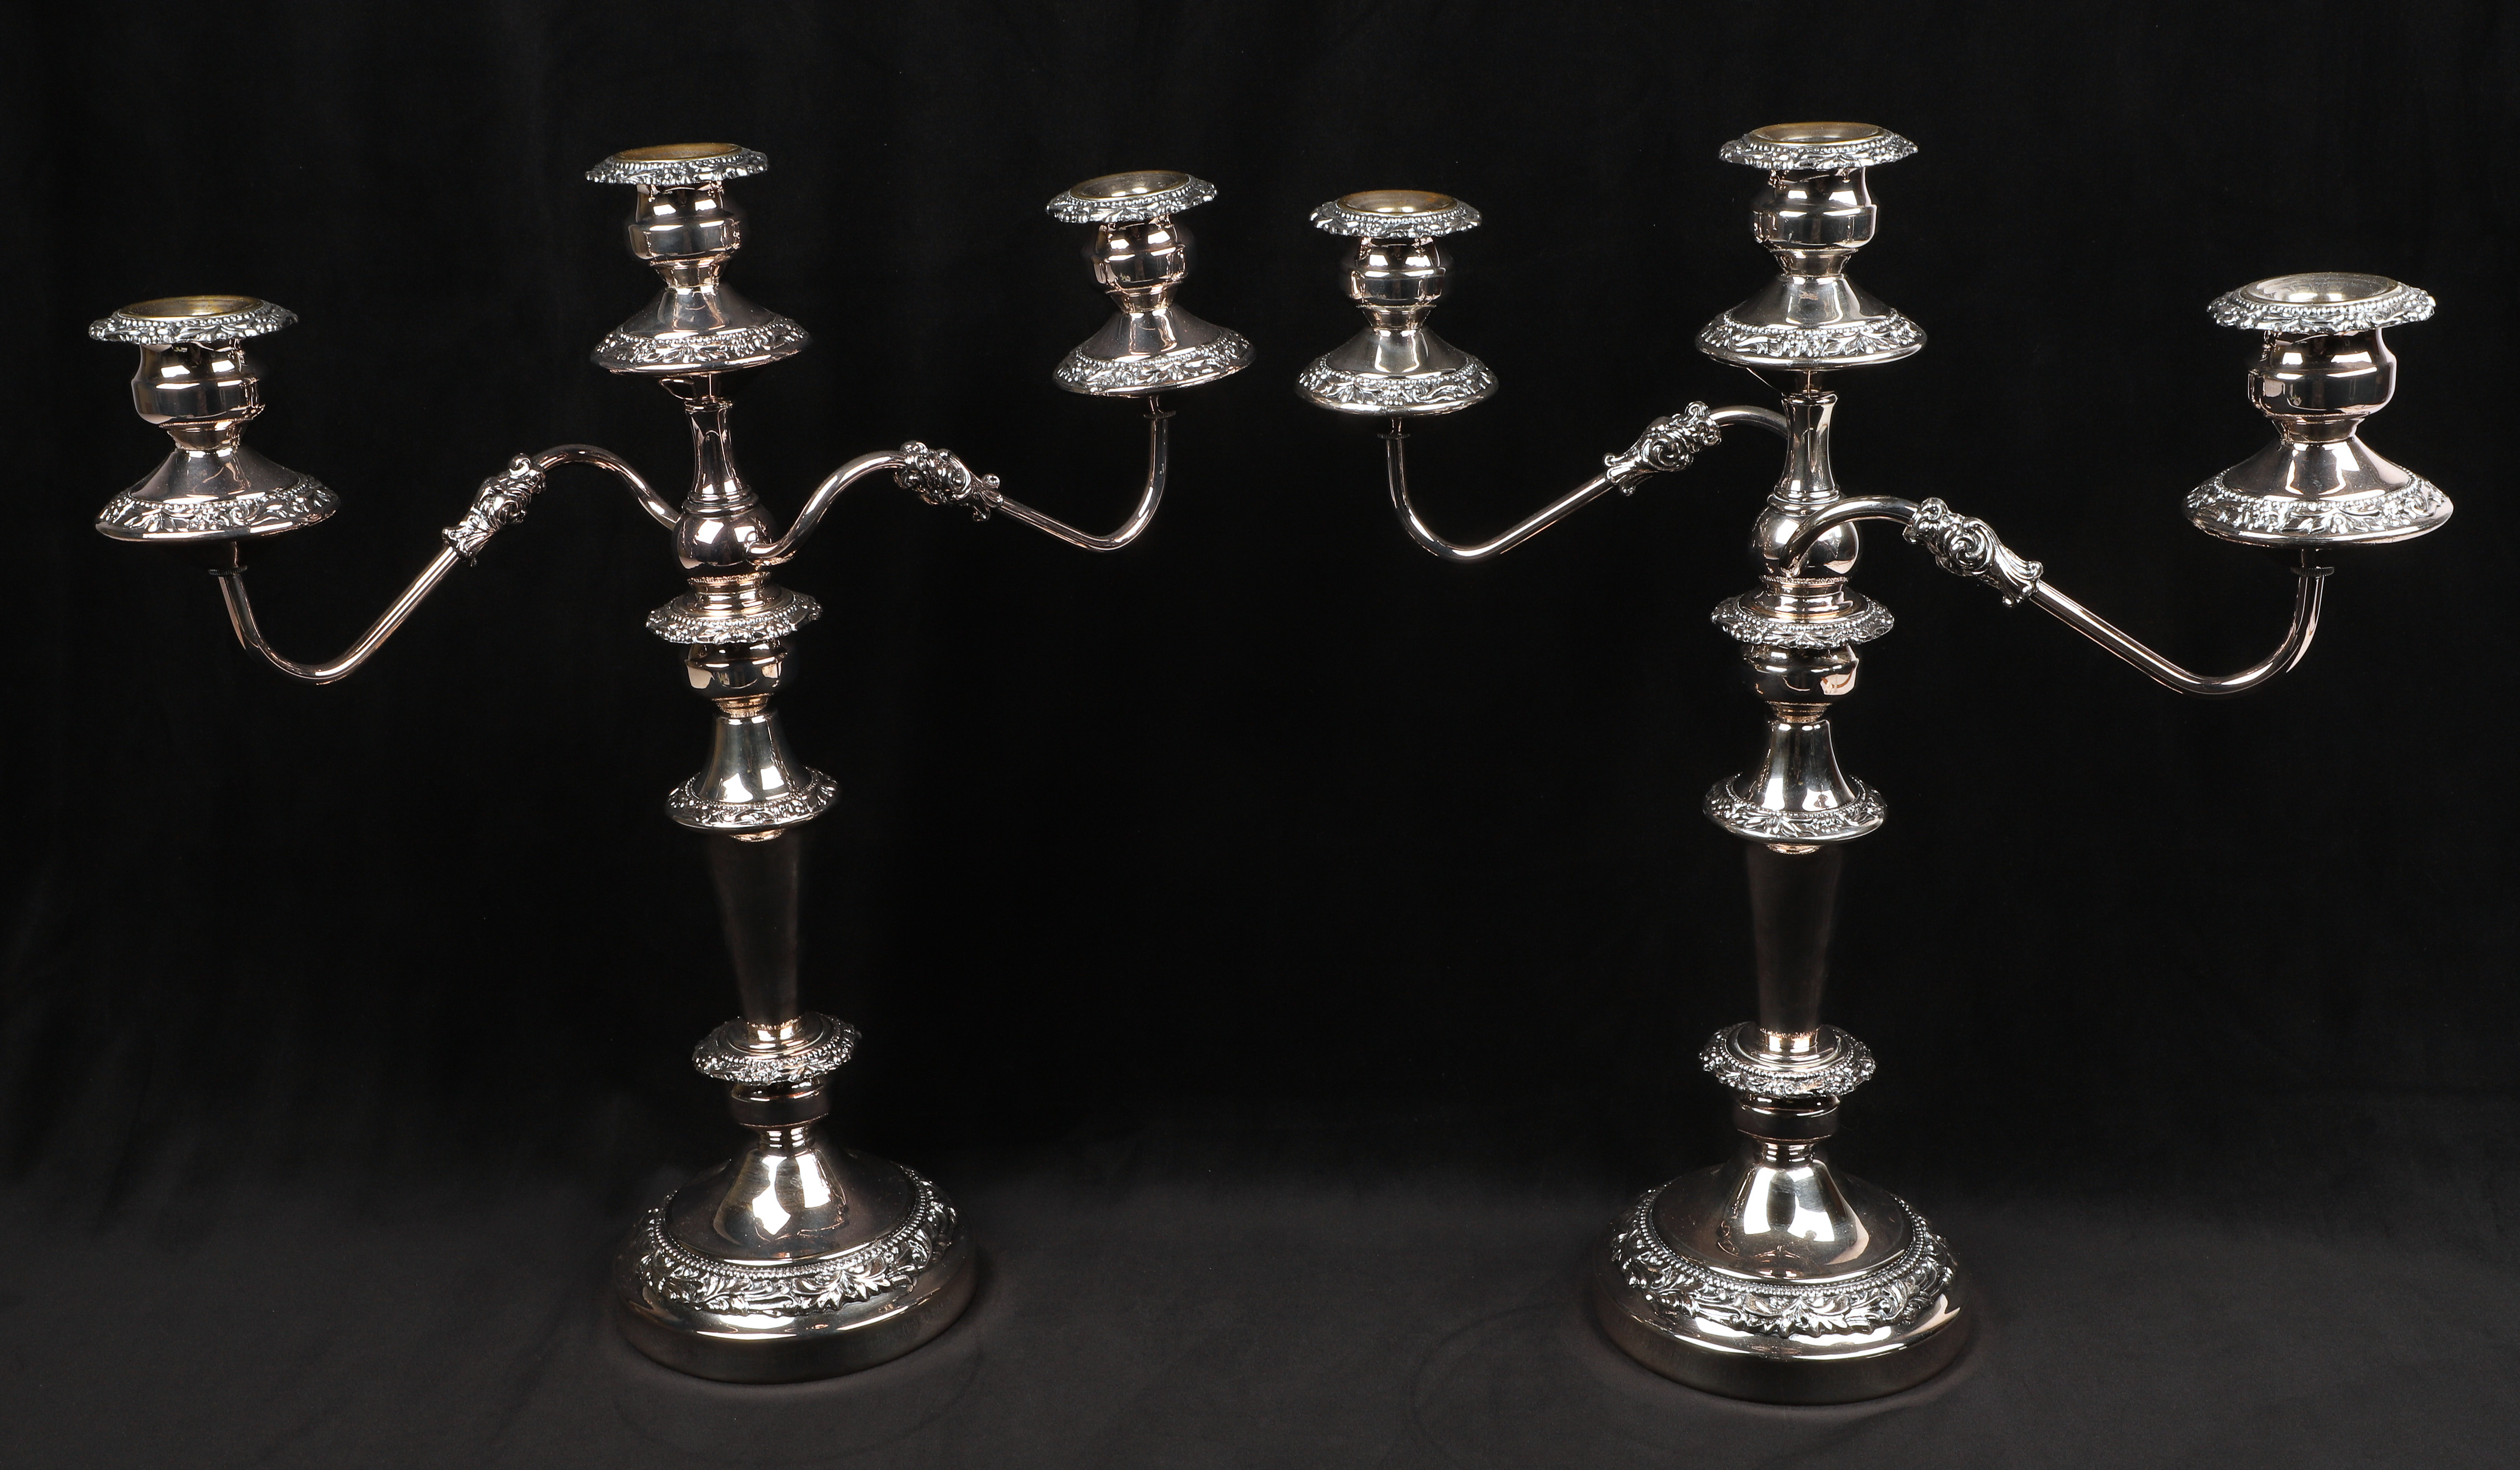 Pair of Goldfeder Silver Co silver plate